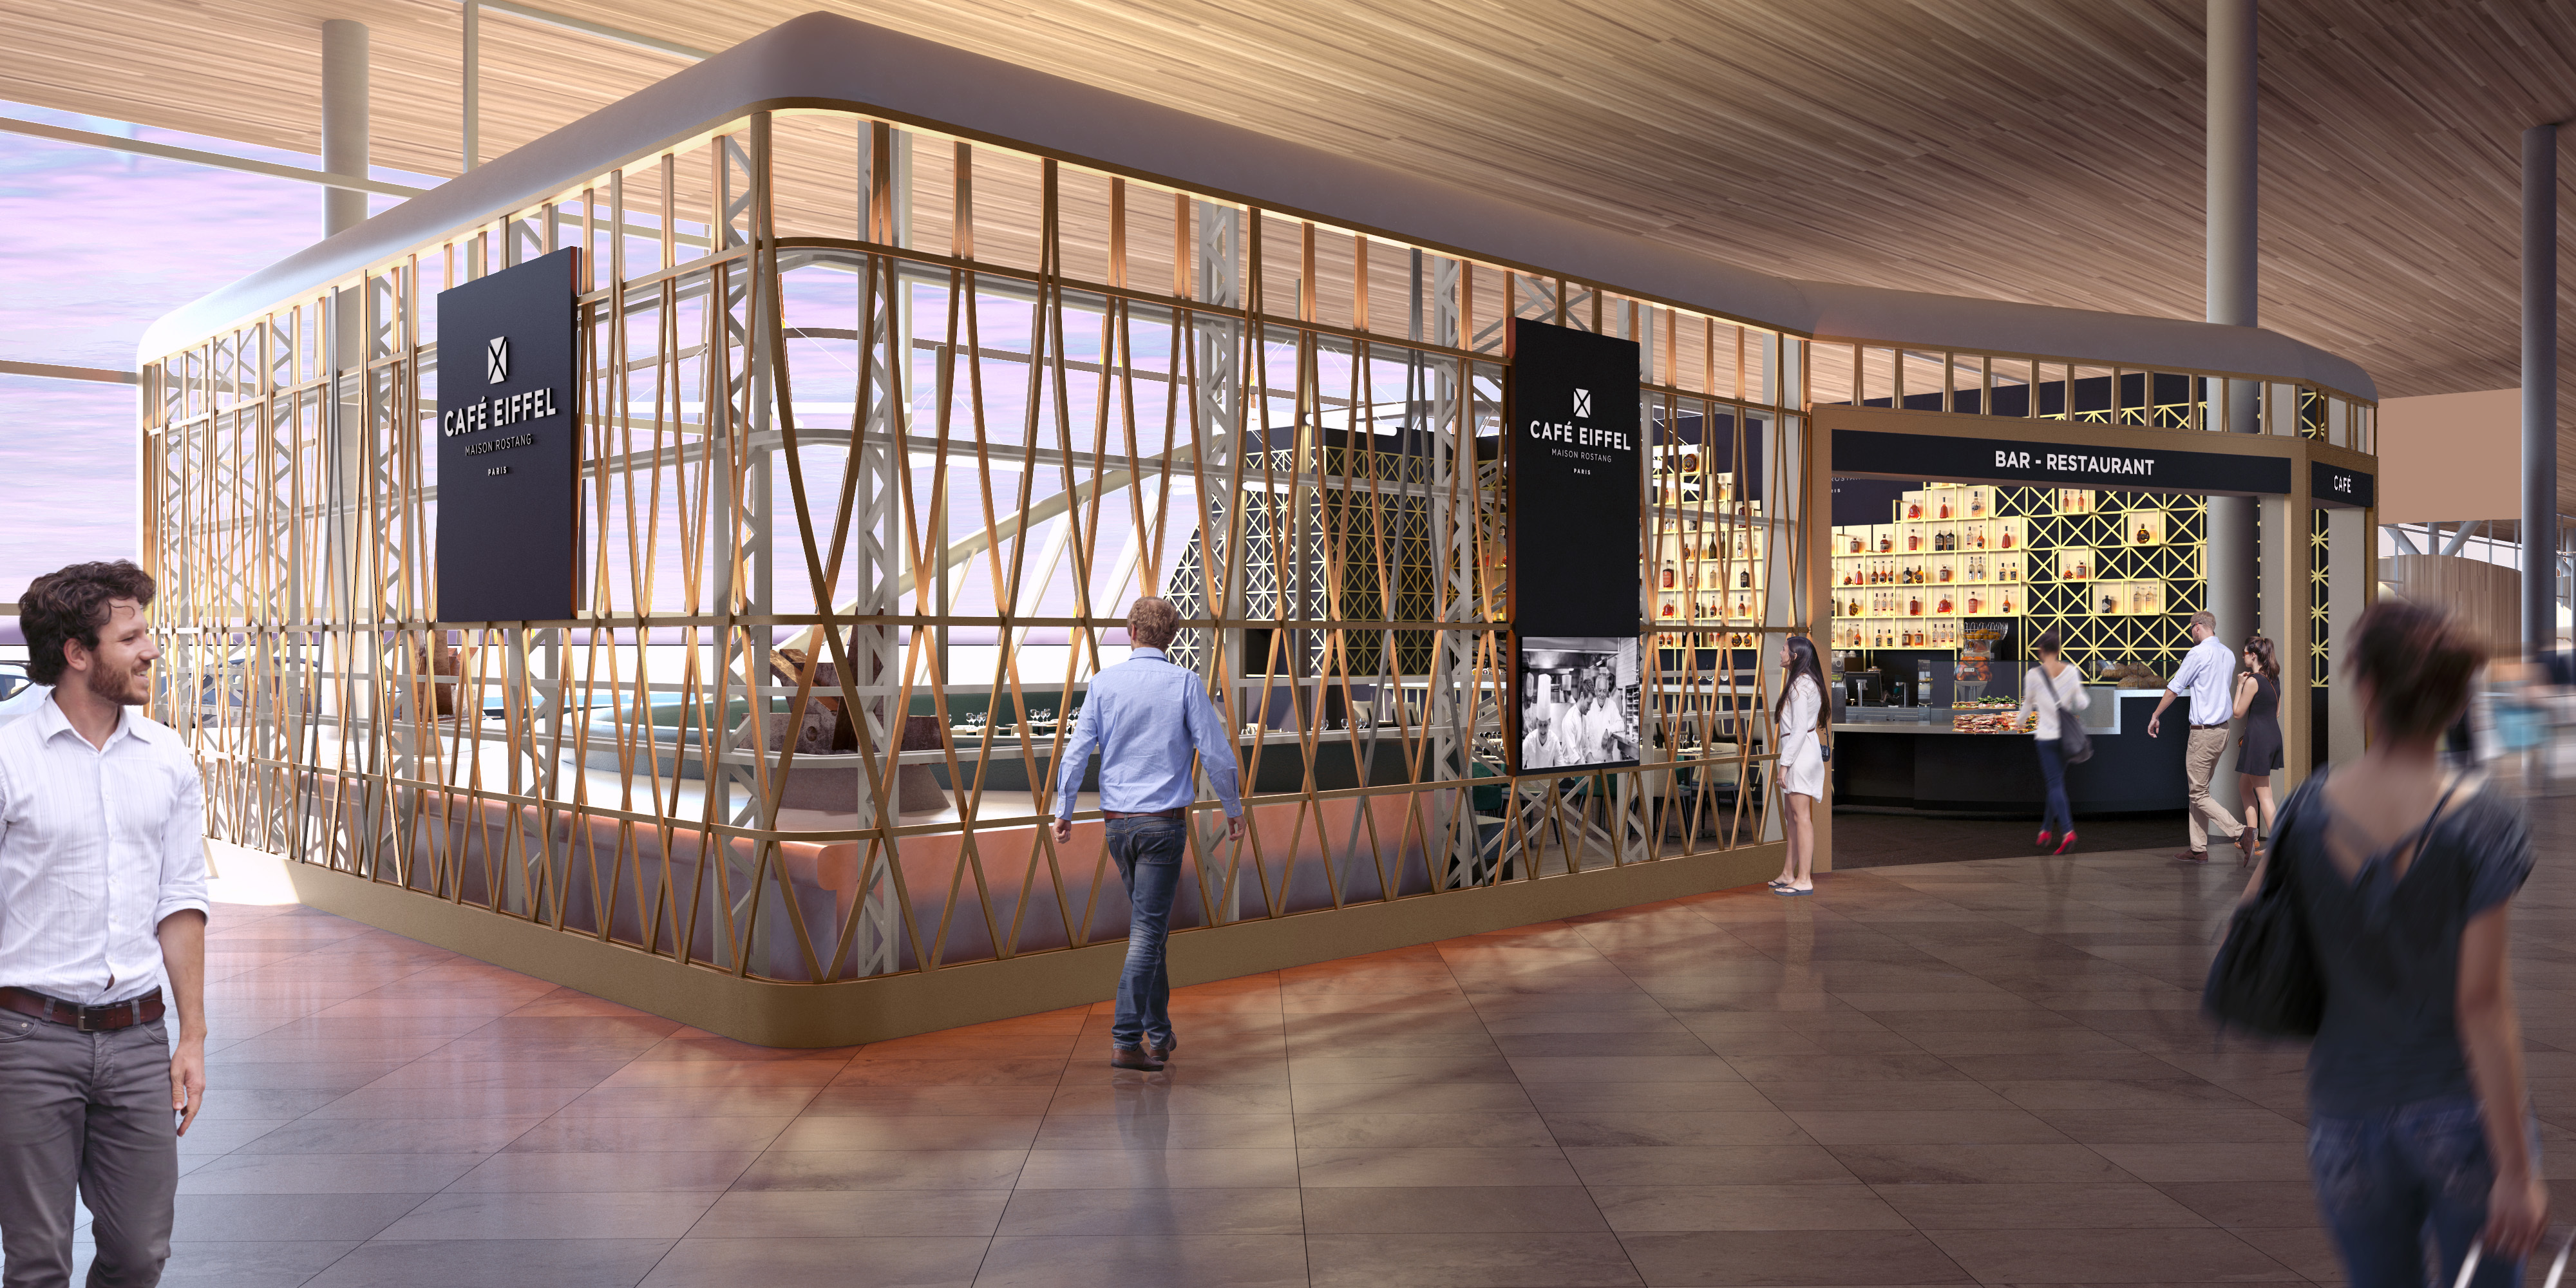 Paris Aéroport is expanding its gastronomic offering at the heart